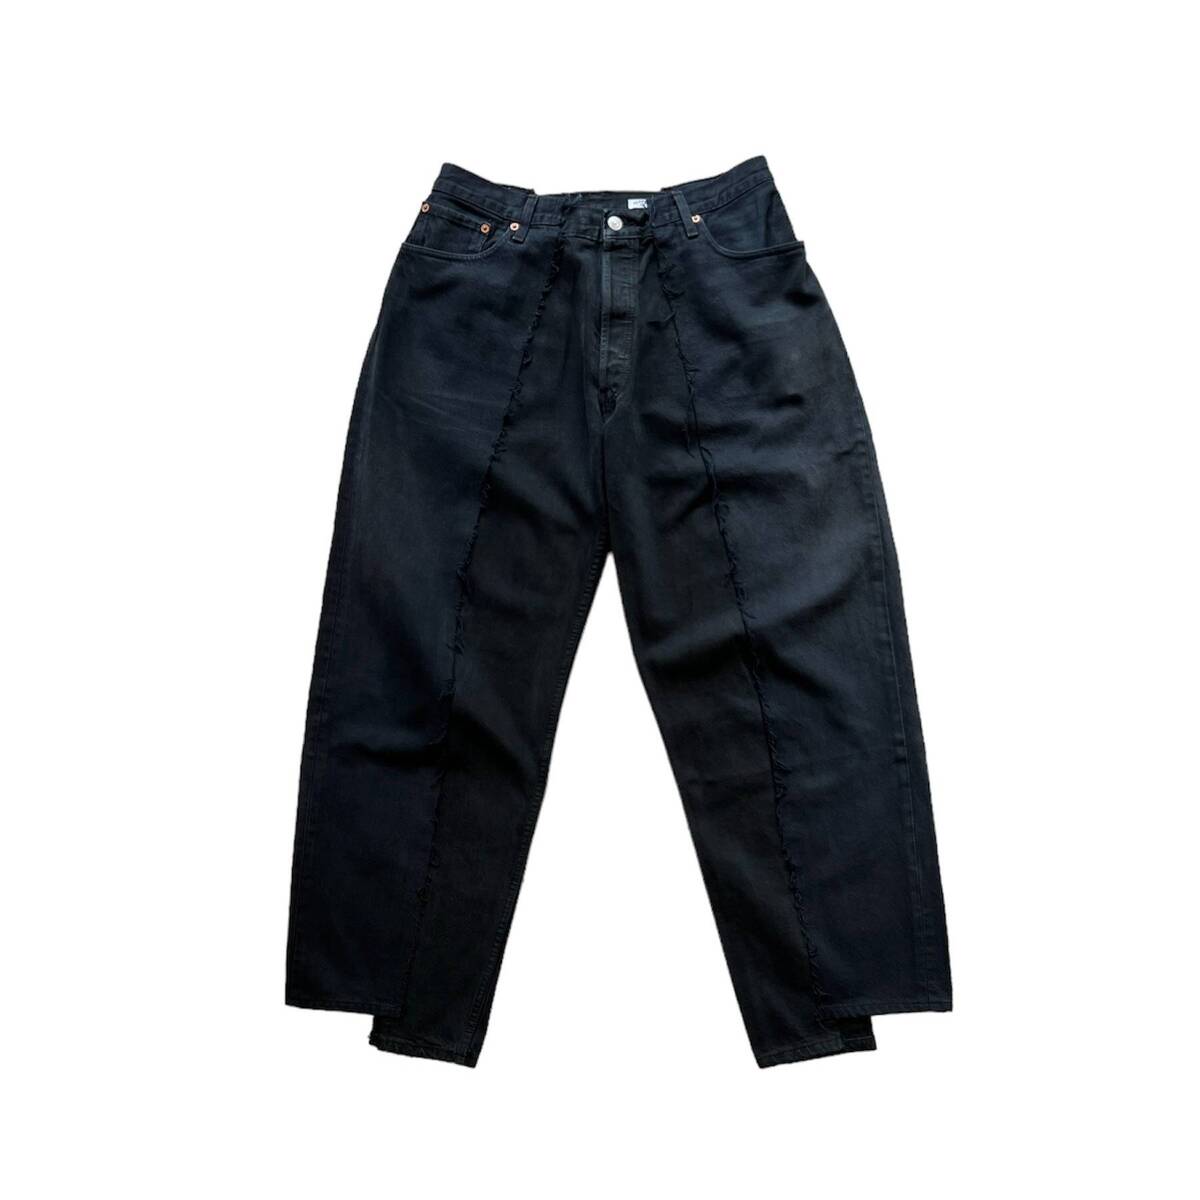 OLDPARK baggy jeans blackパンツ